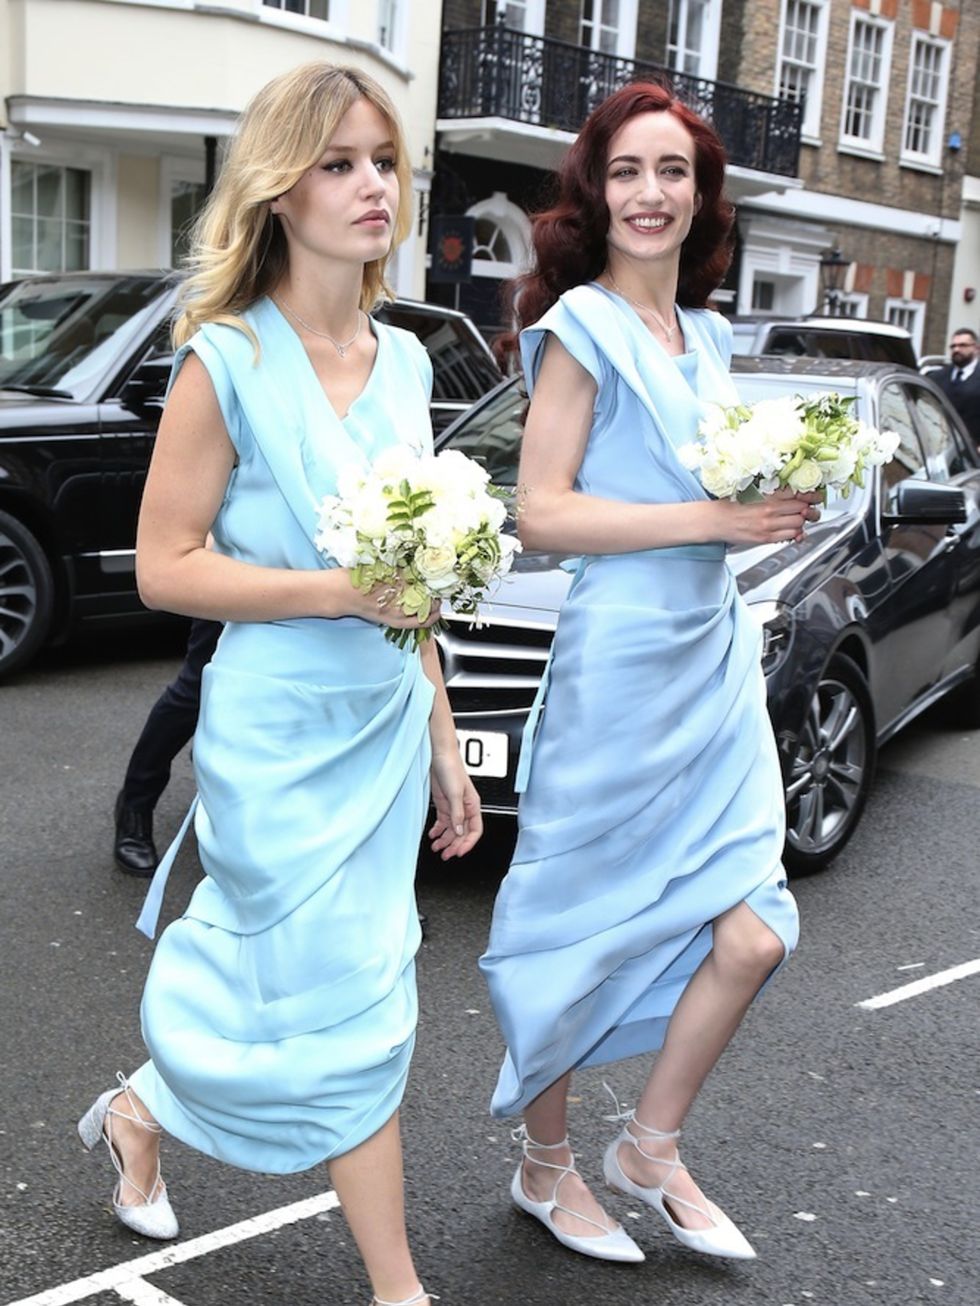 Georgia May and Elizabeth Jagger acted as bridesmaids for mother Jerry Hall as she married Rupert Murdoch in March 2016. They wore pale blue dresses by Vivienne Westwood.